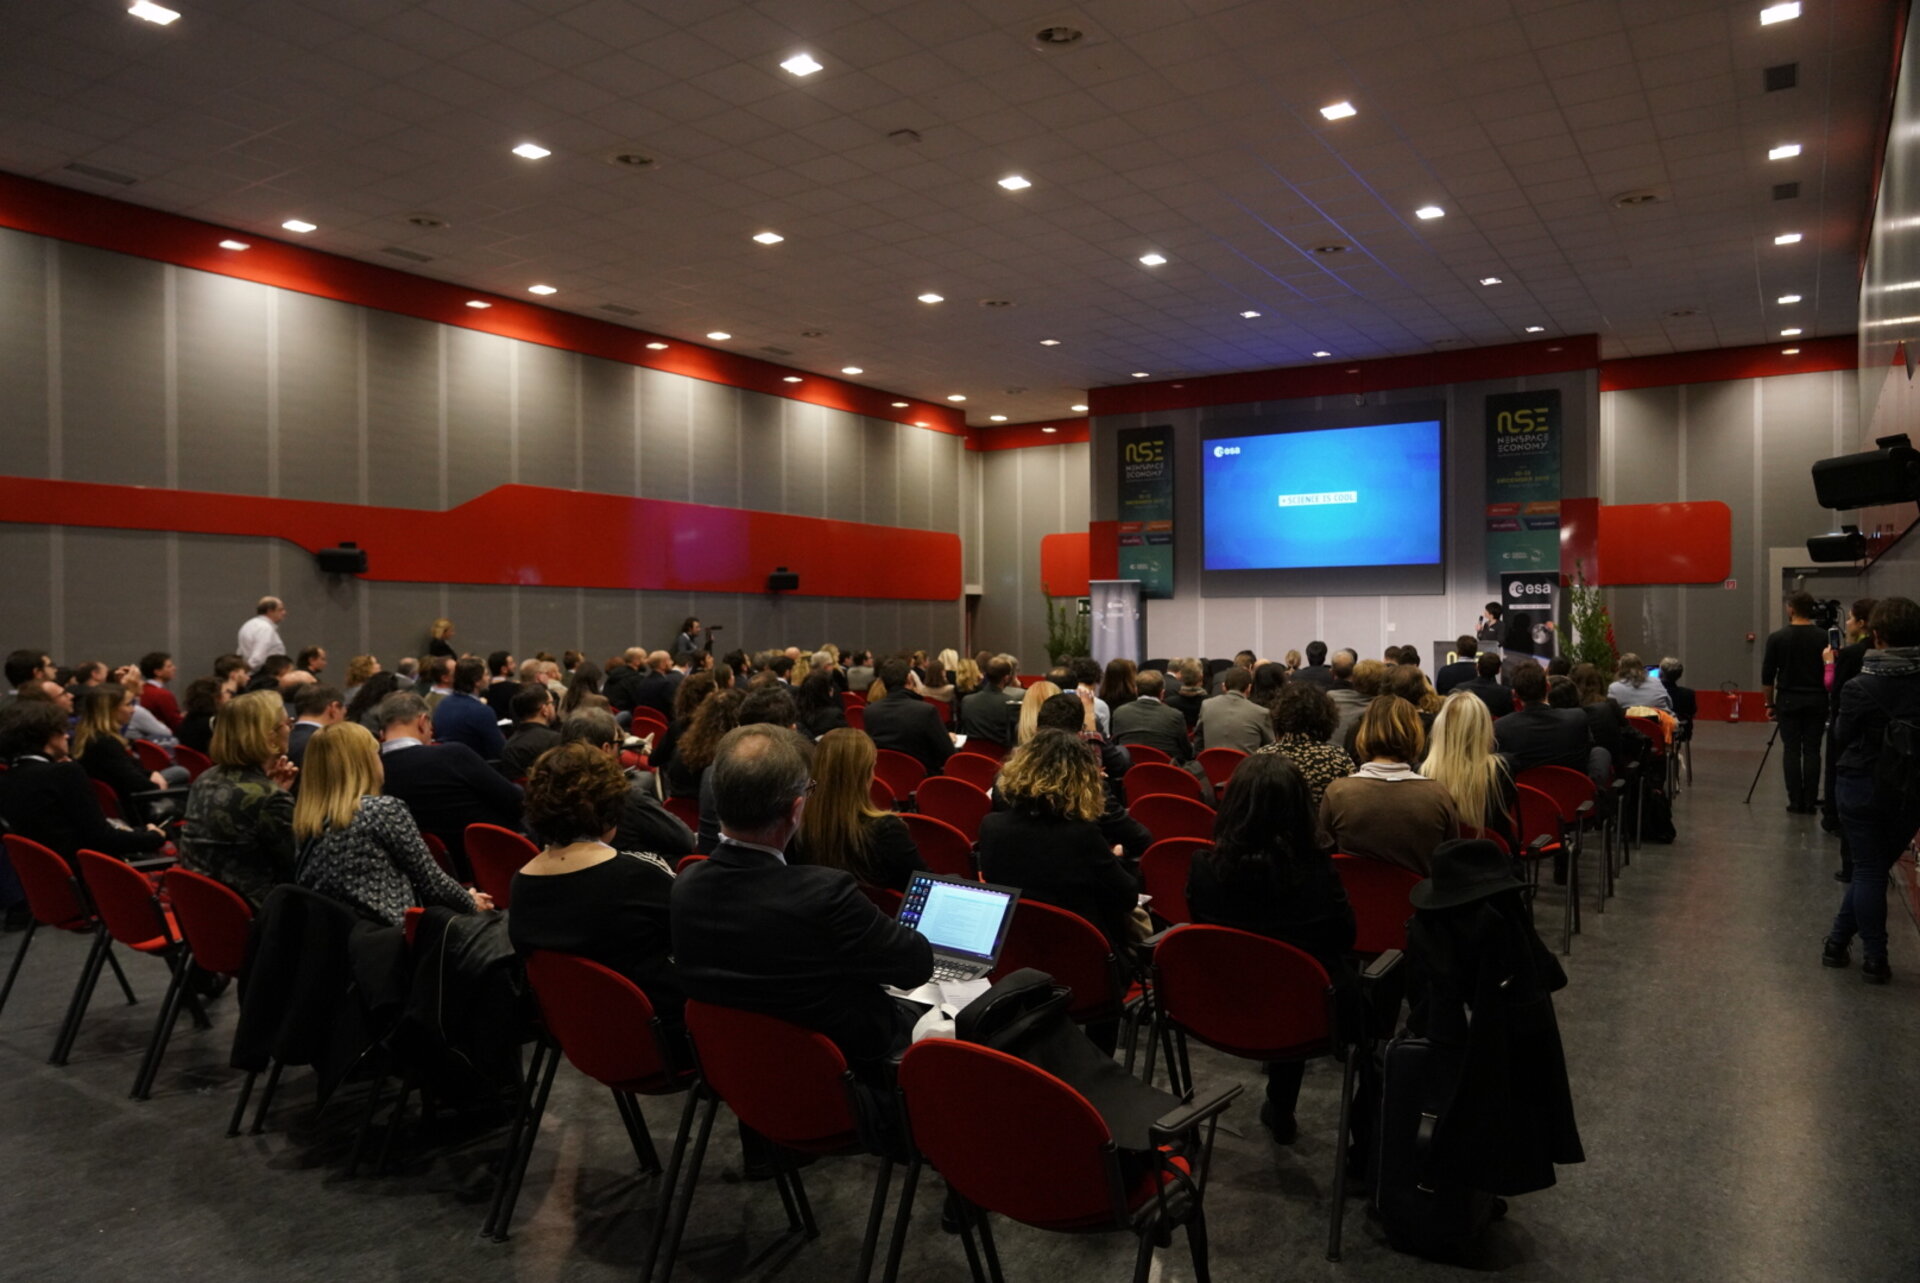 A Global Space Economic Forum was held at the New Space Economy European Expoforum